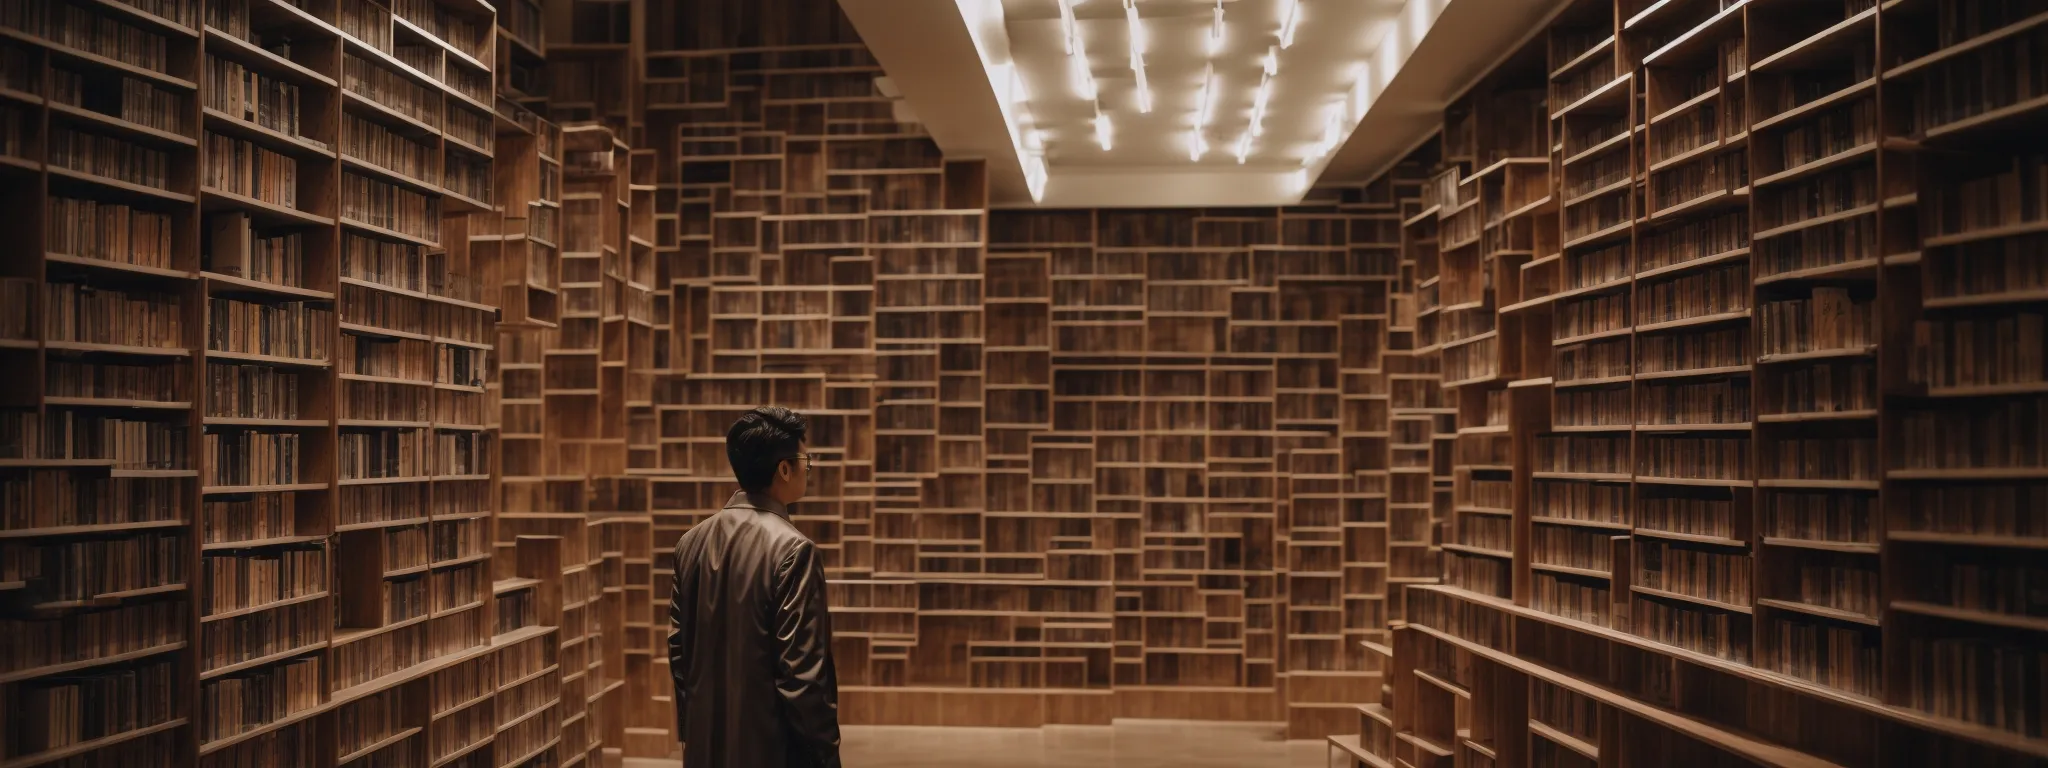 a person stands surrounded by a maze of library shelves, highlighting the concept of navigating through vast information spaces.